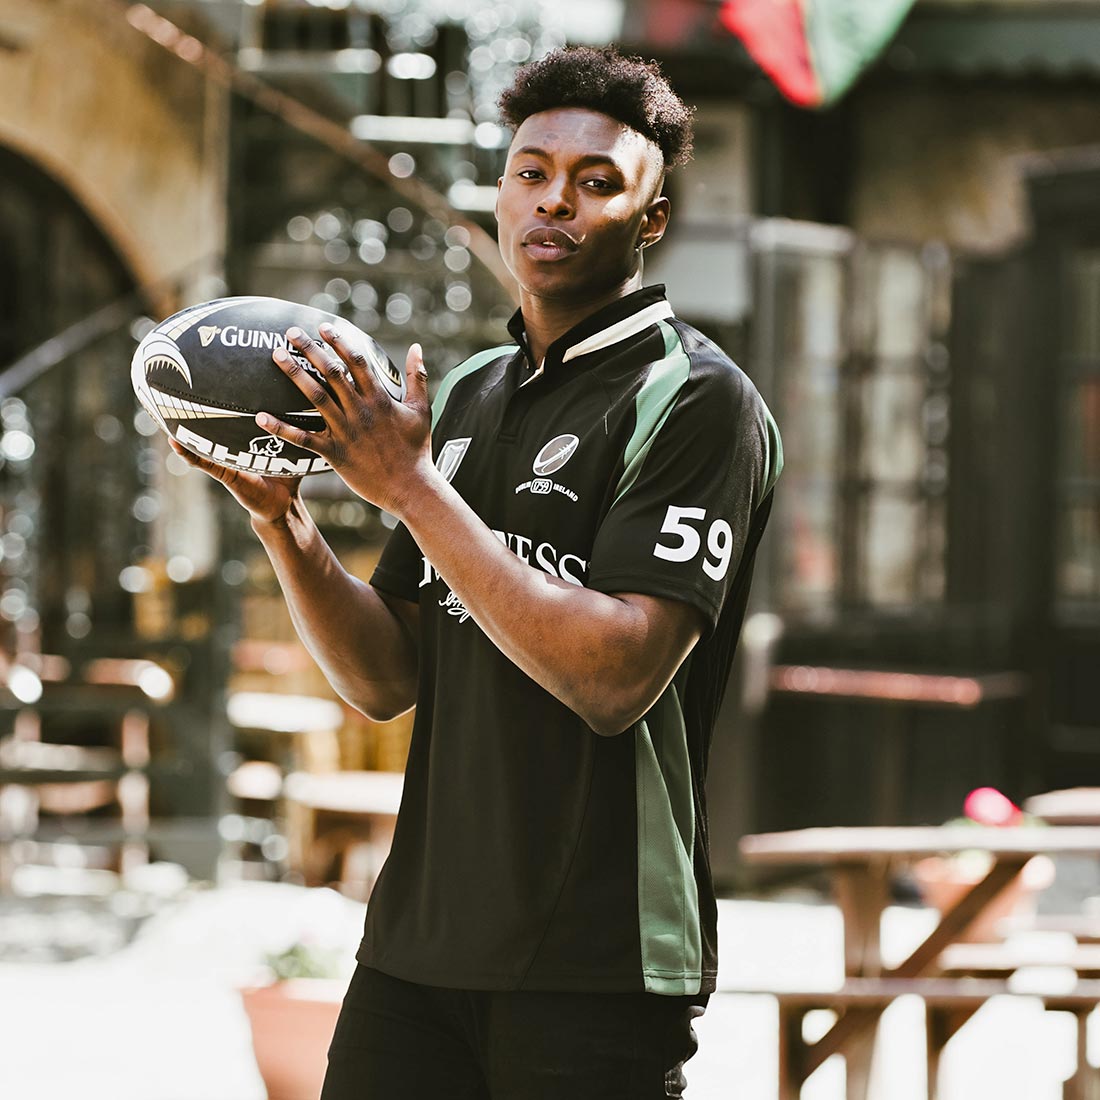 A young man wearing a Guinness Short Sleeve Performance Rugby Jersey, holding a rugby ball in front of a restaurant.